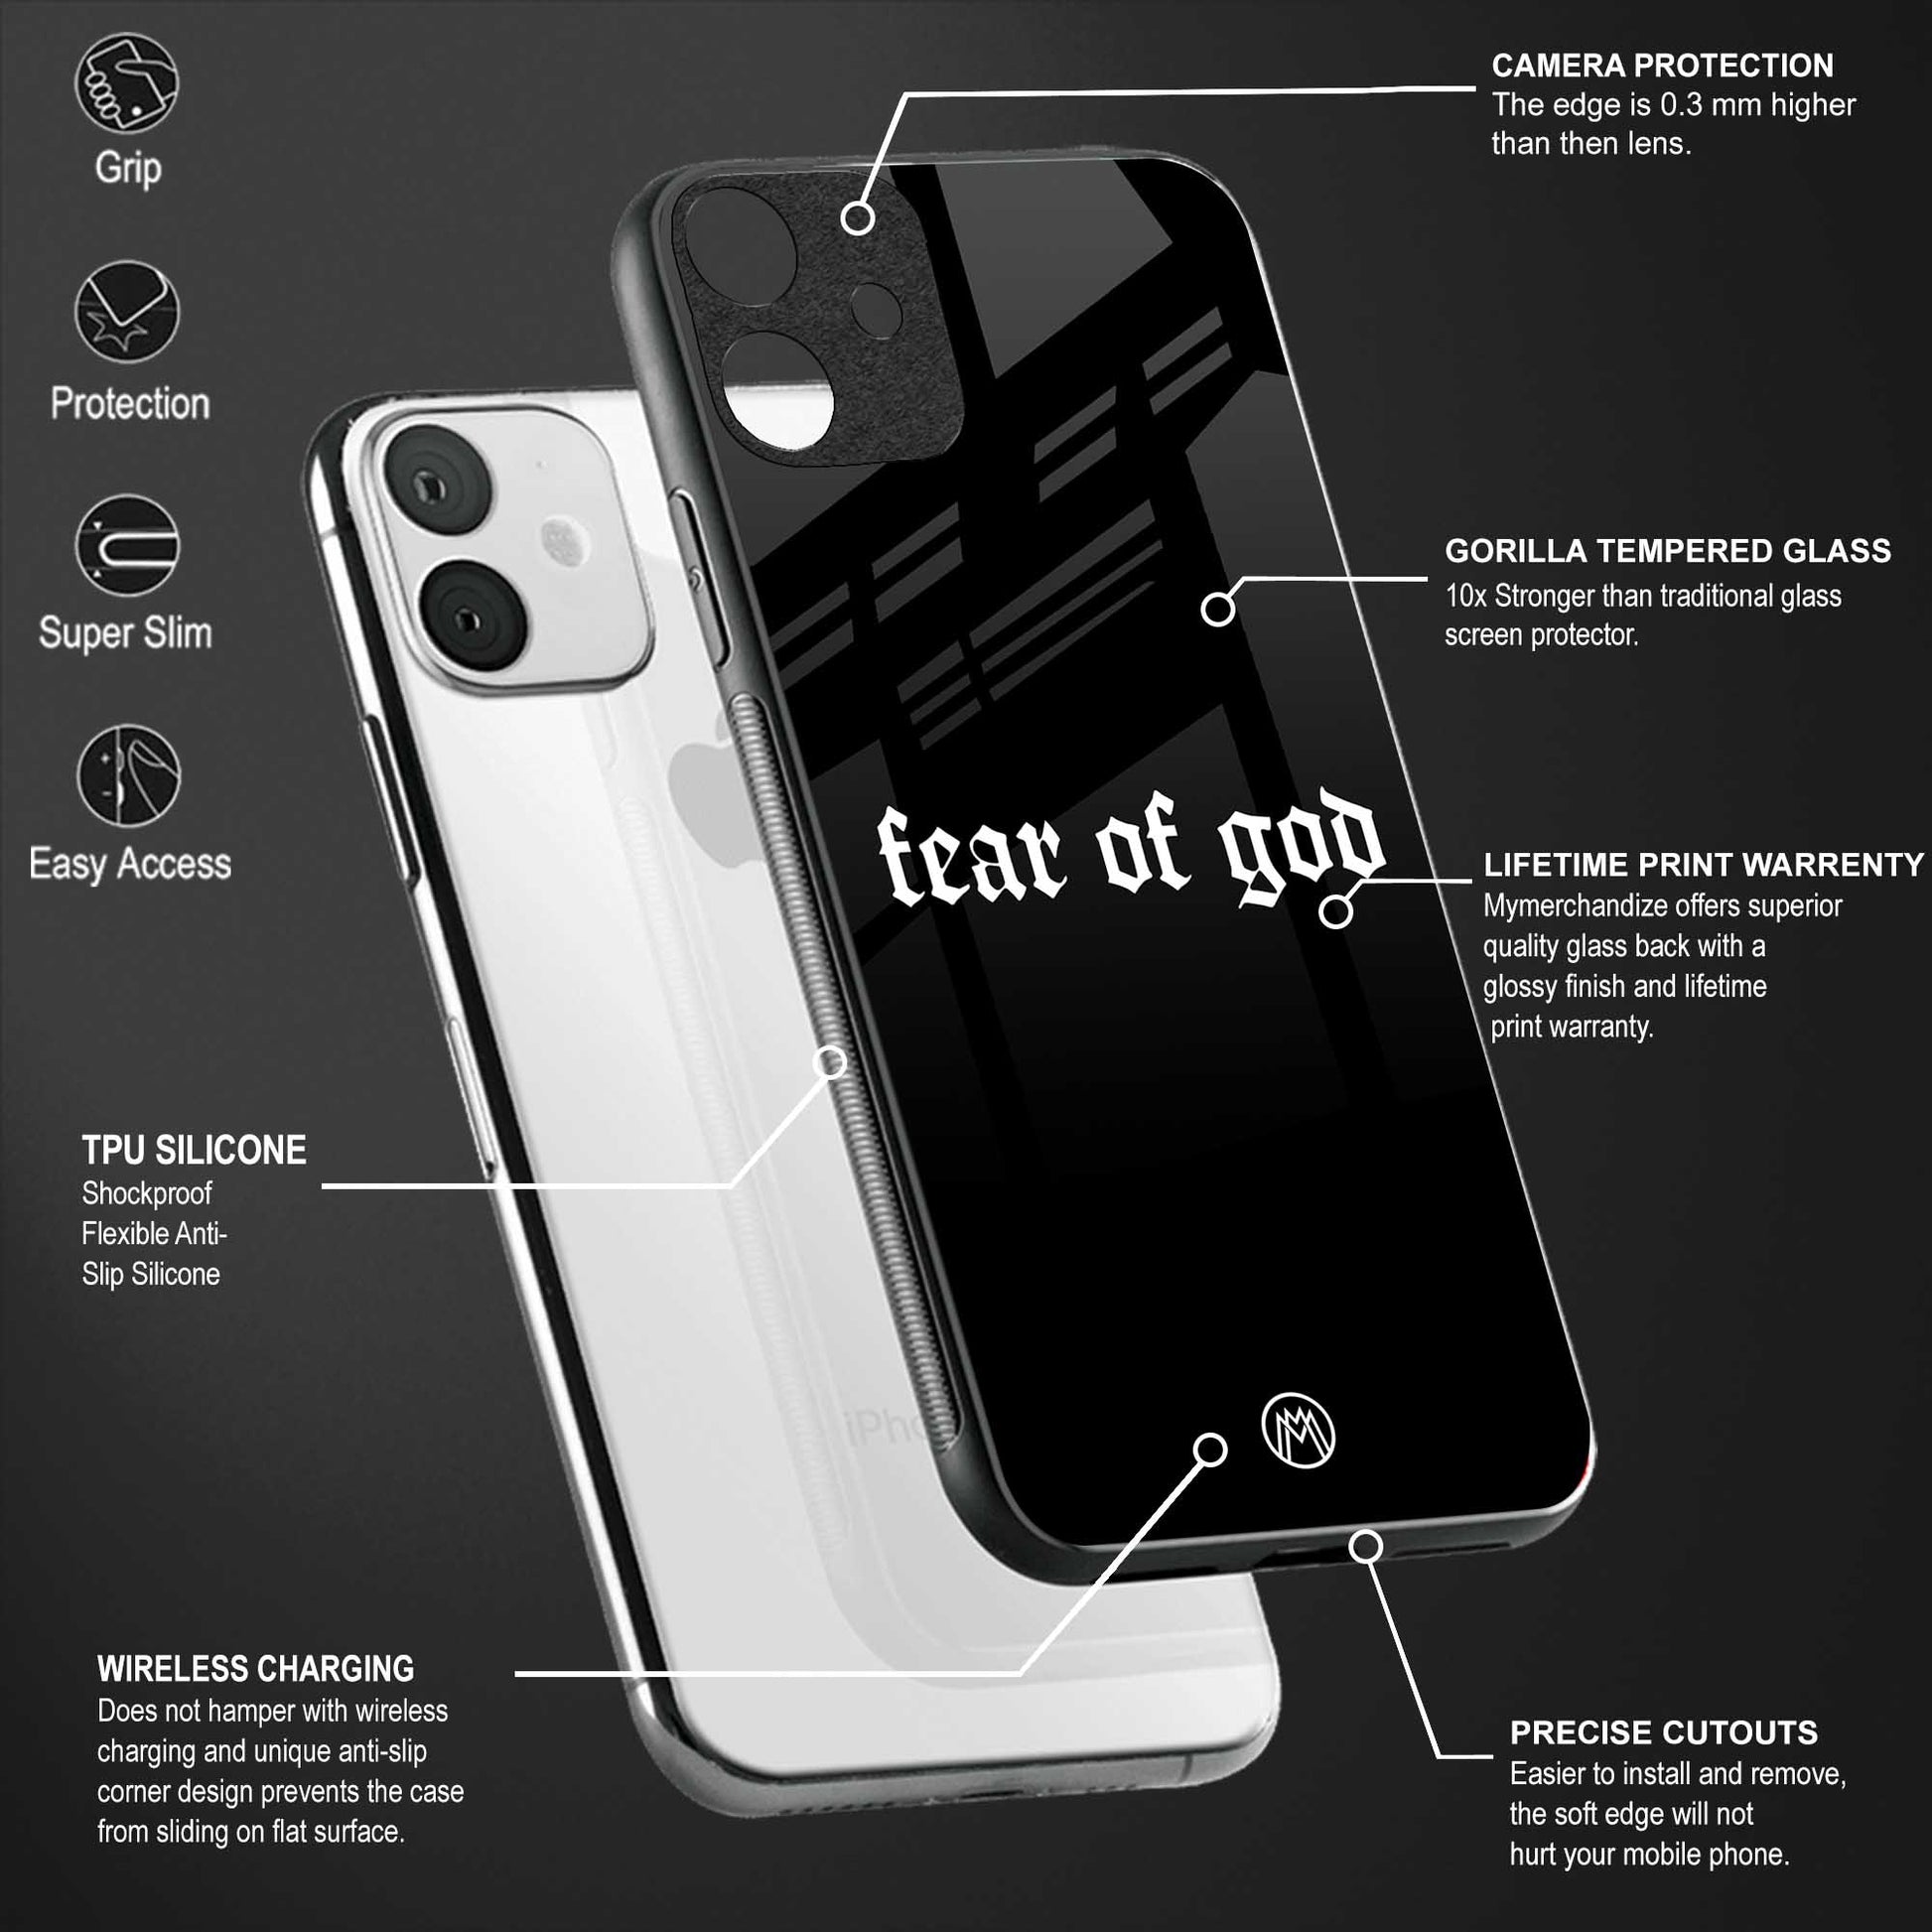 fear of god phone cover for mi 11t pro 5g